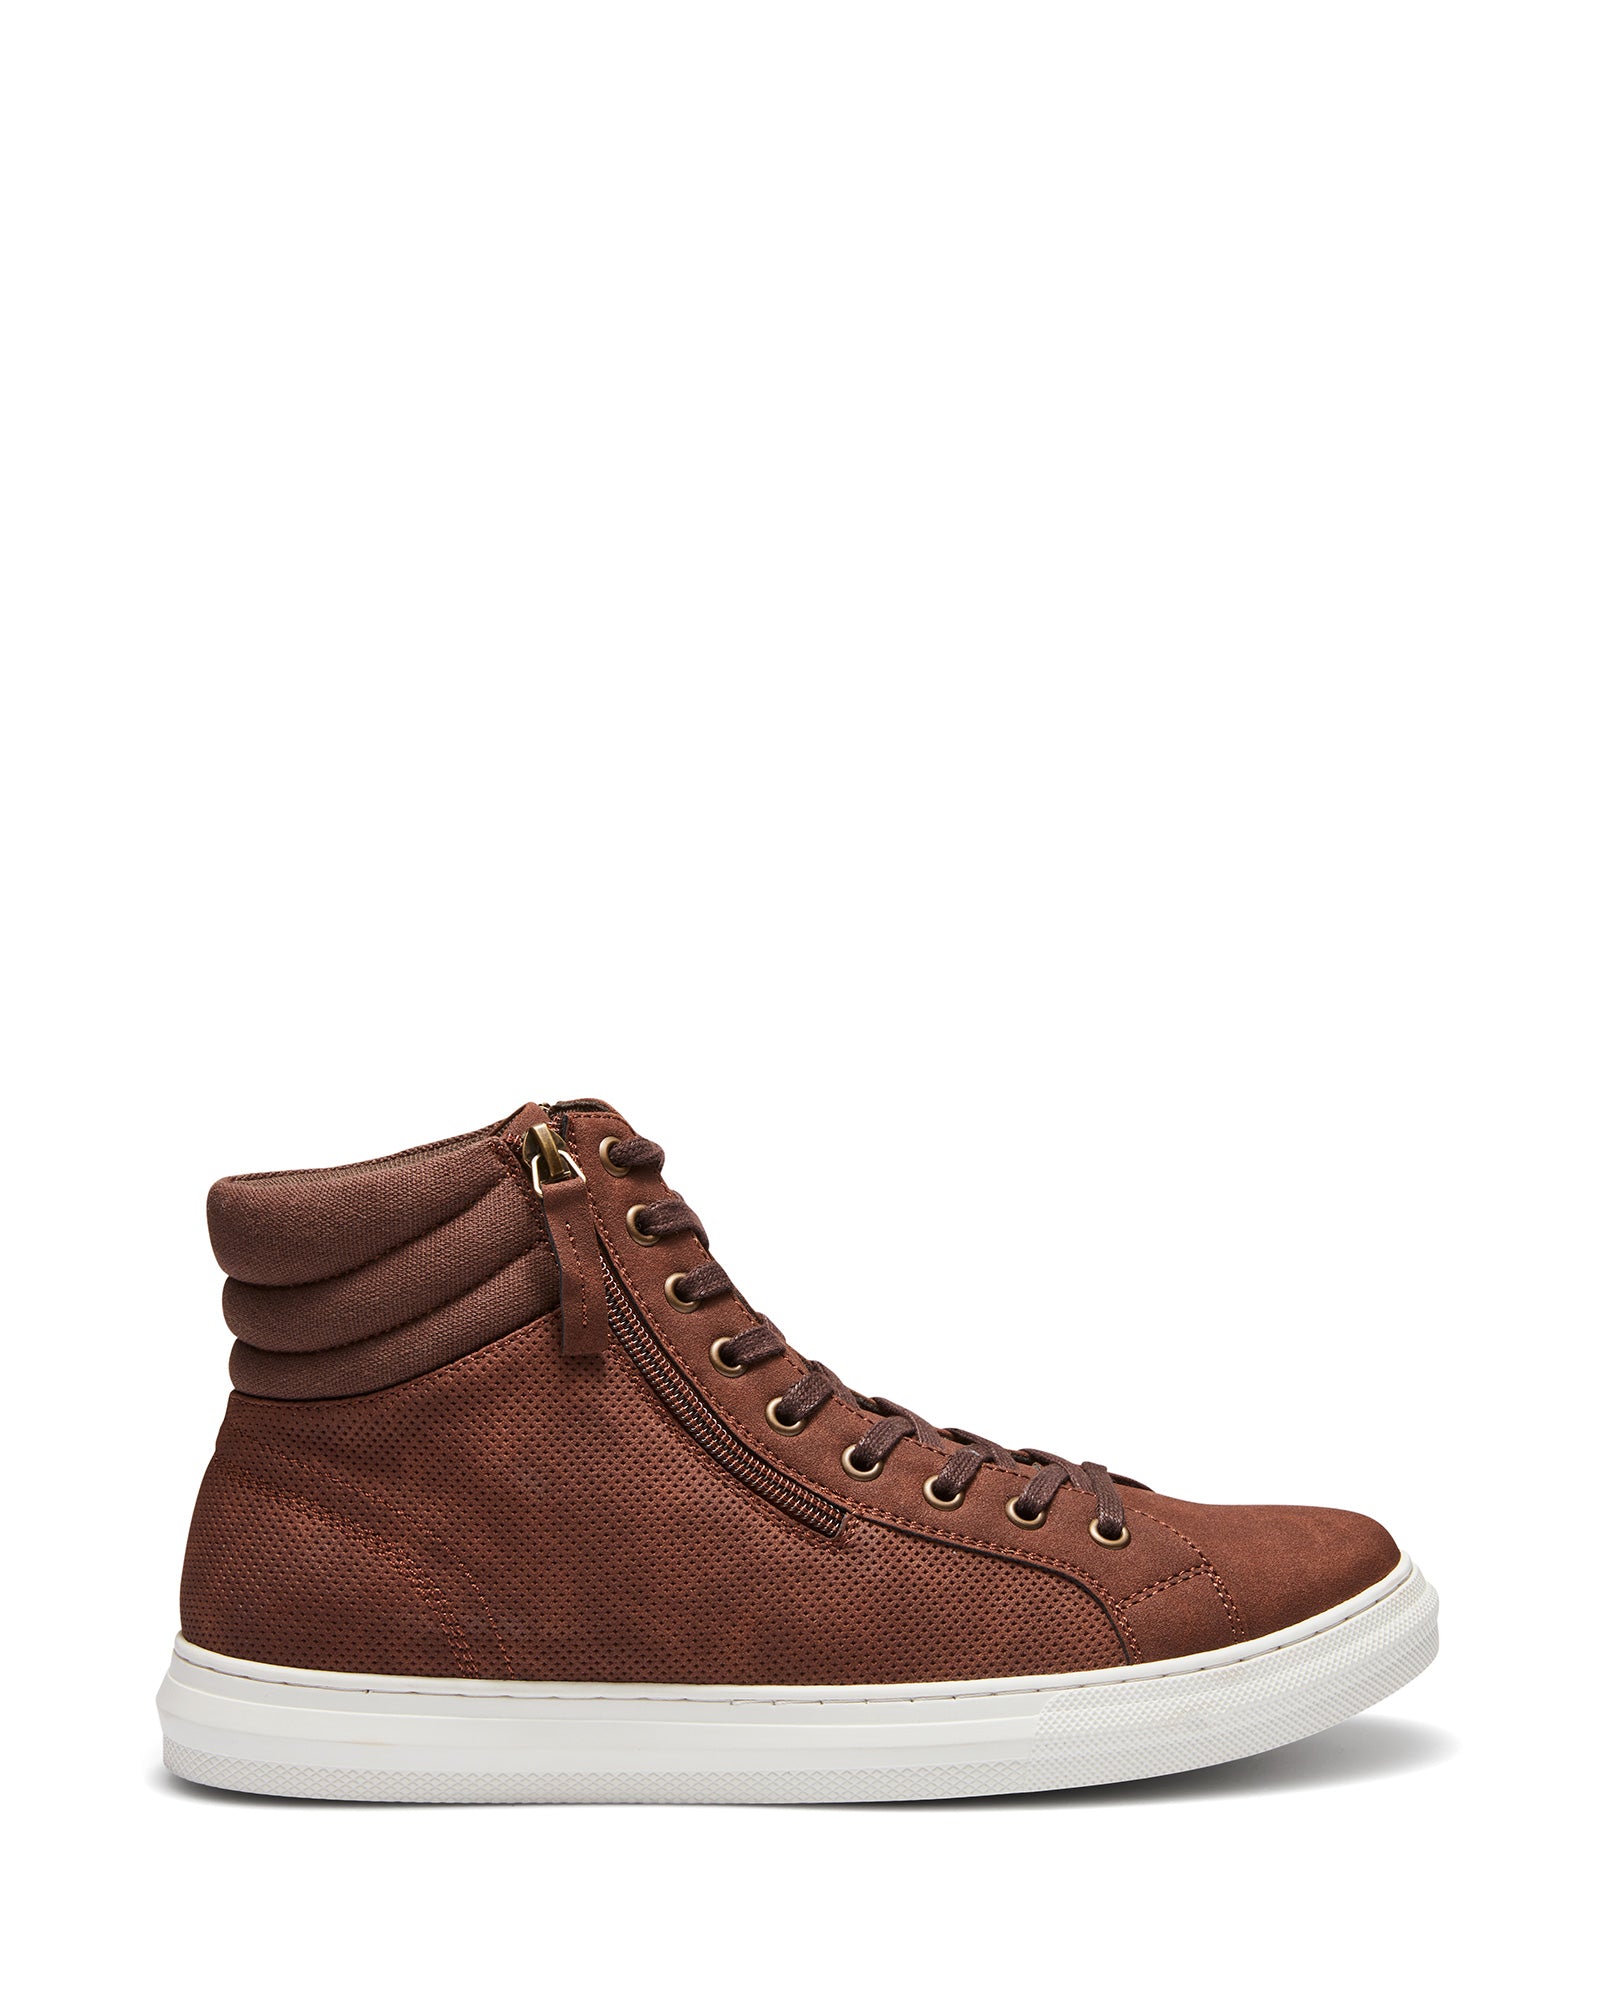 Uncut Shoes Kelly Chocolate | Men's Sneaker | High Top | Lace Up | Casual